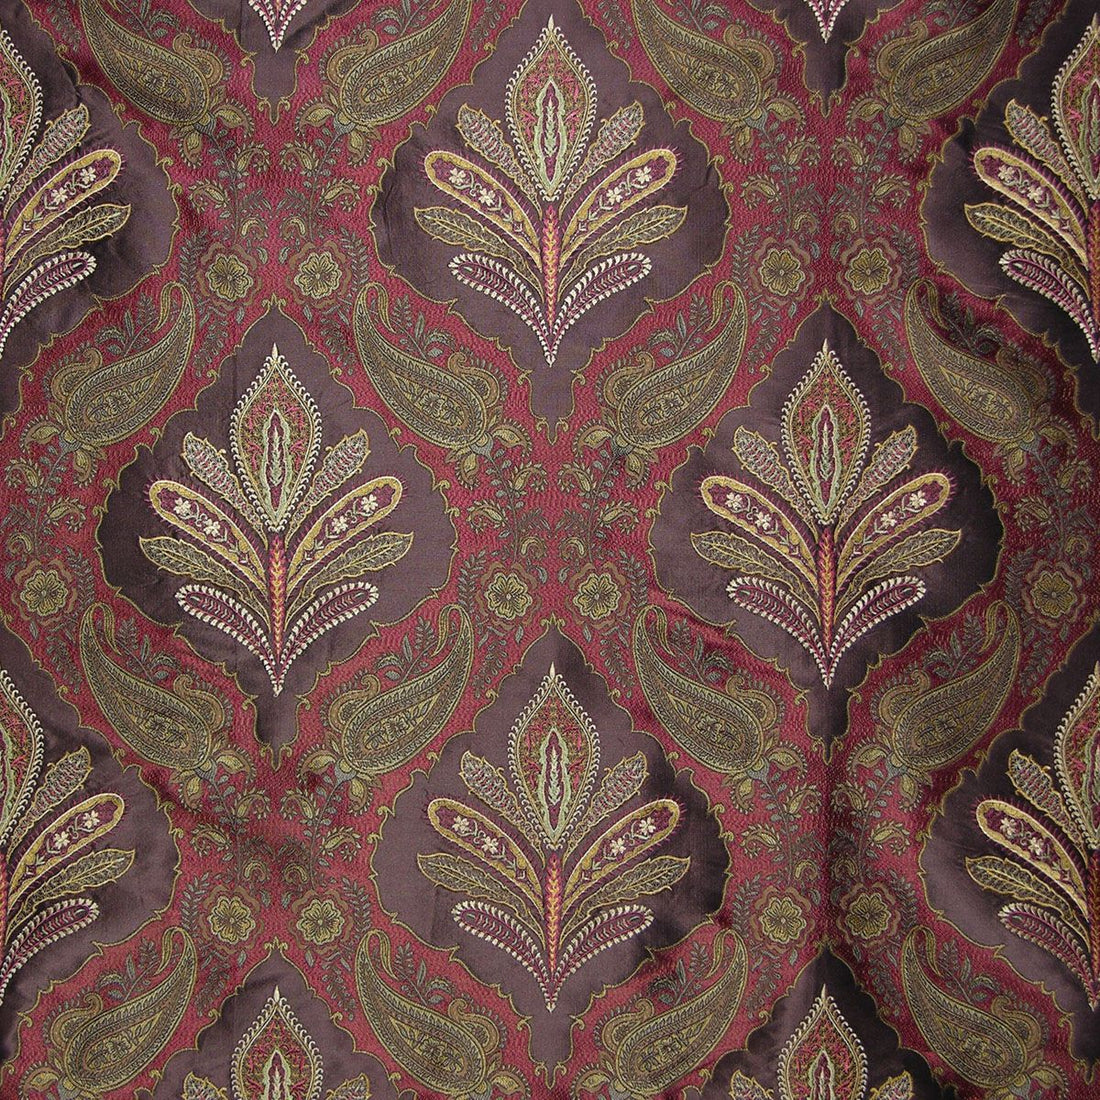 Darani fabric in crimson ganache color - pattern number SQ 00011480 - by Scalamandre in the Old World Weavers collection